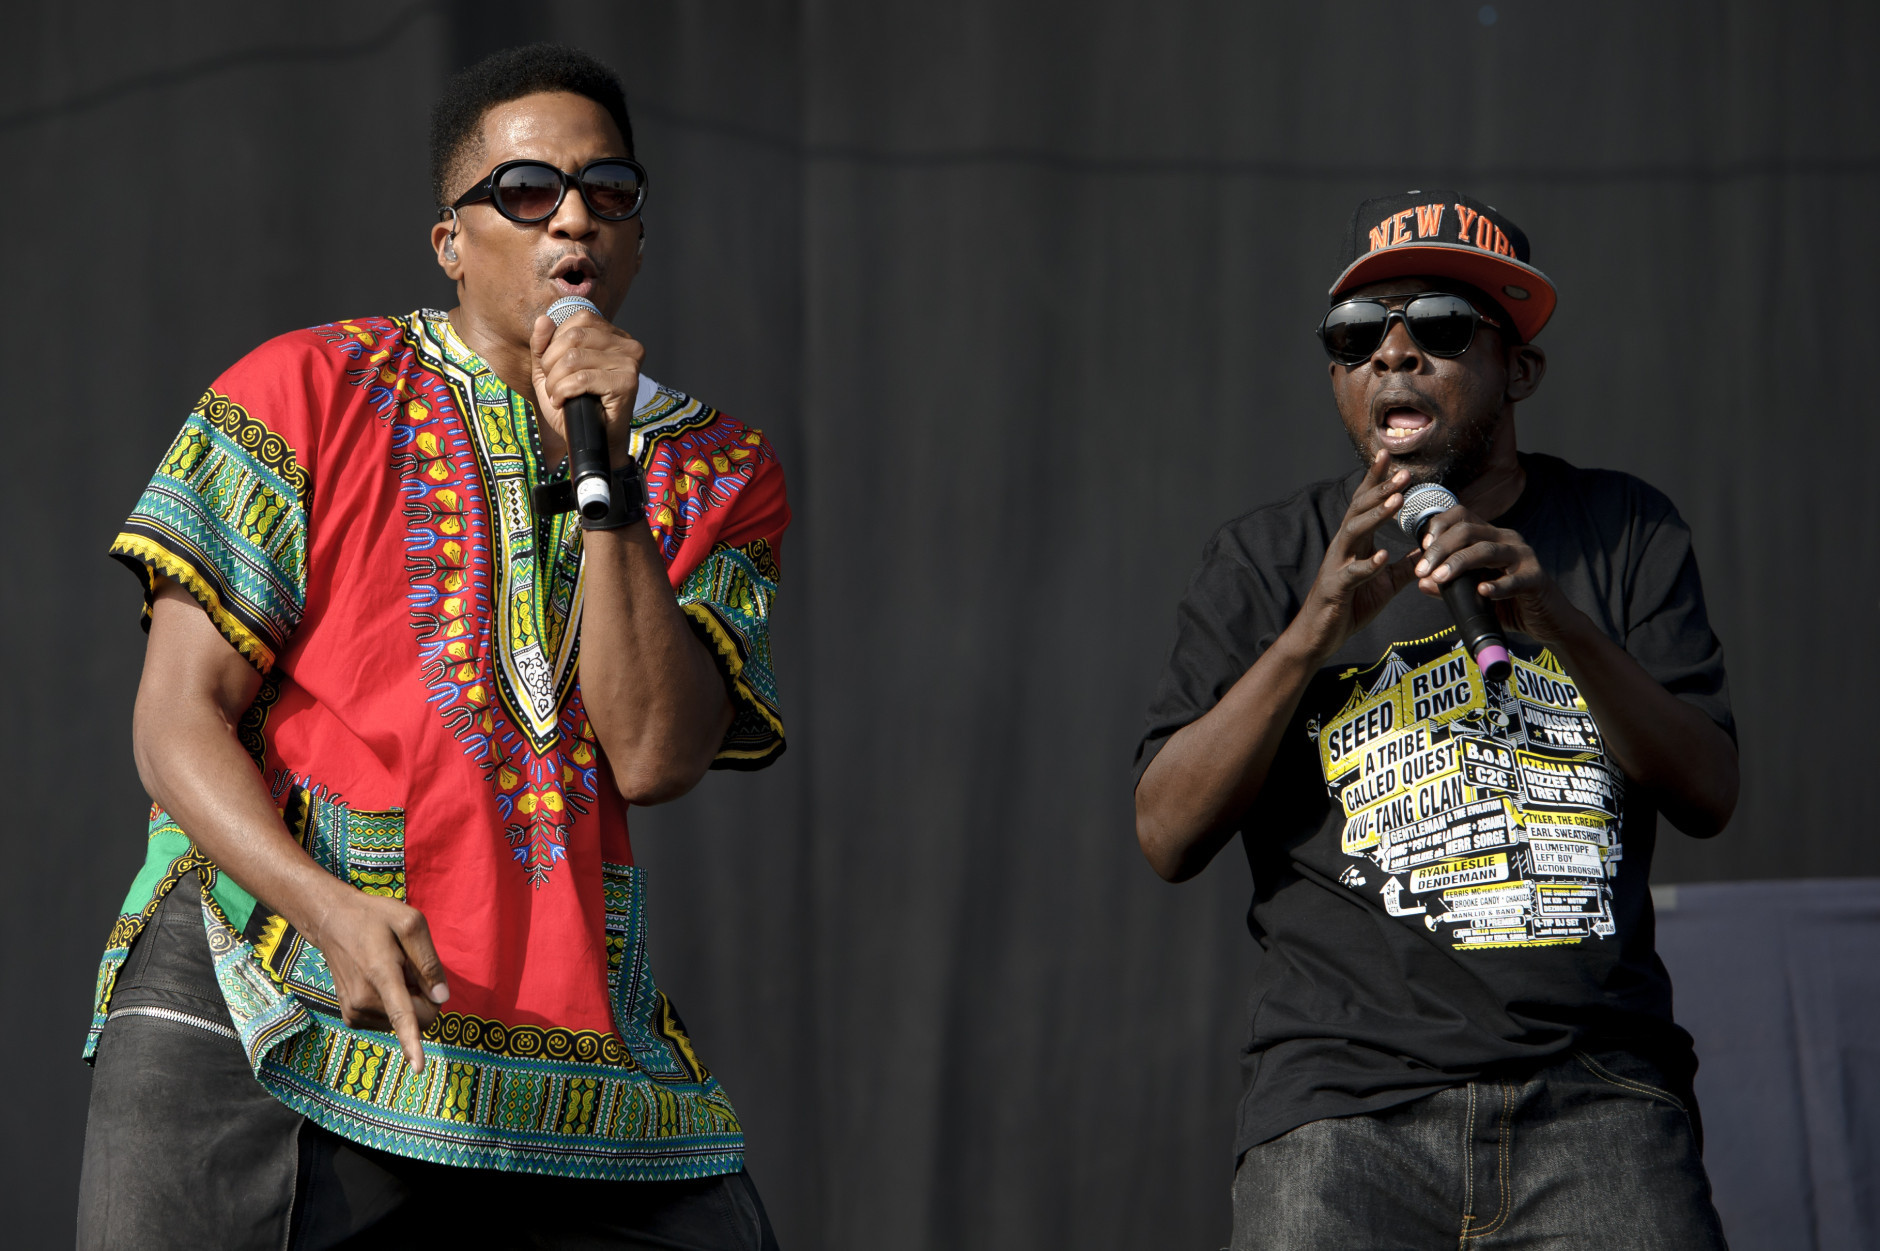 FILE - In this July 14, 2013 file photo, Q-Tip, left, and  Phife Dawg from U.S group A Tribe Called Quest performs on stage during the Wireless Festival at the Queen Elizabeth Olympic Park, in London. Dawg, a masterful lyricist whose witty wordplay was a linchpin of the groundbreaking hip-hop group, died Tuesday, March 22, 2016, from complications resulting from diabetes, his family said in a statement Wednesday. He was 45. (Photo by Jonathan Short/Invision/AP, File)